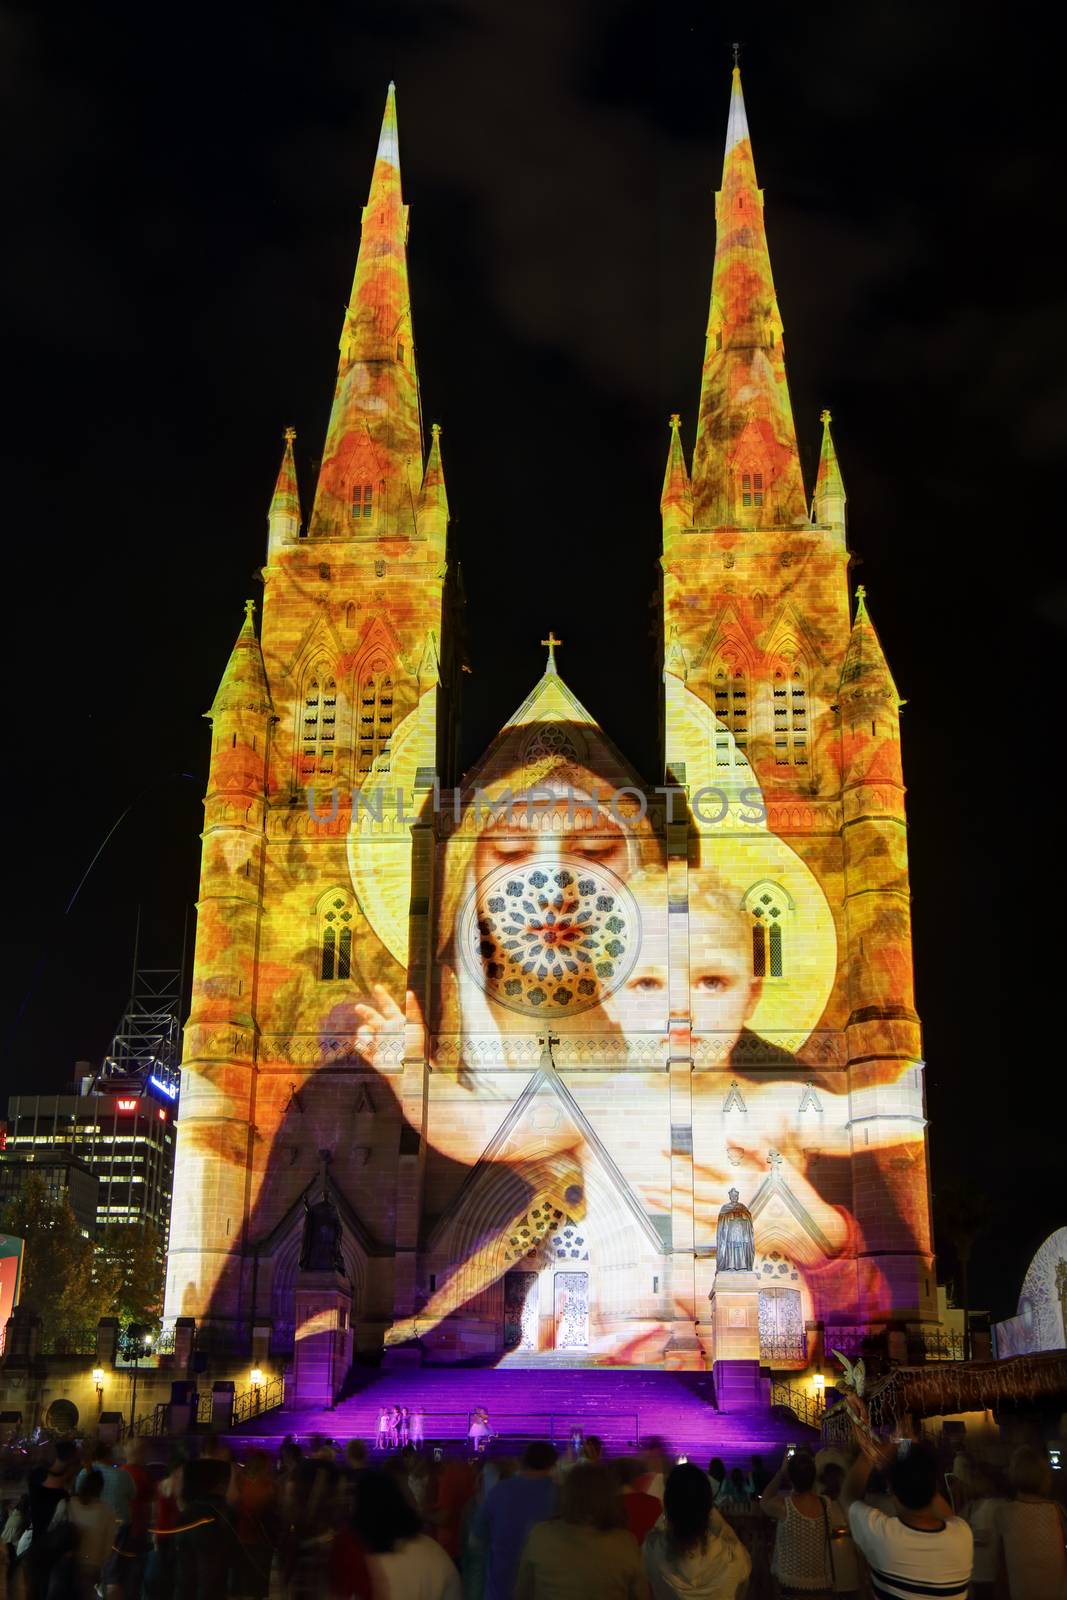 SYDNEY, AUSTRALIA - DECEMBER 23, 2014; Crowds of people on the forecourt of St Mary's Cathedral Sydney CBD watch and enjoy the Christmas lights display.  Madonna and Child one of the many visions on display on the church building sandstone facade at Christmas time.